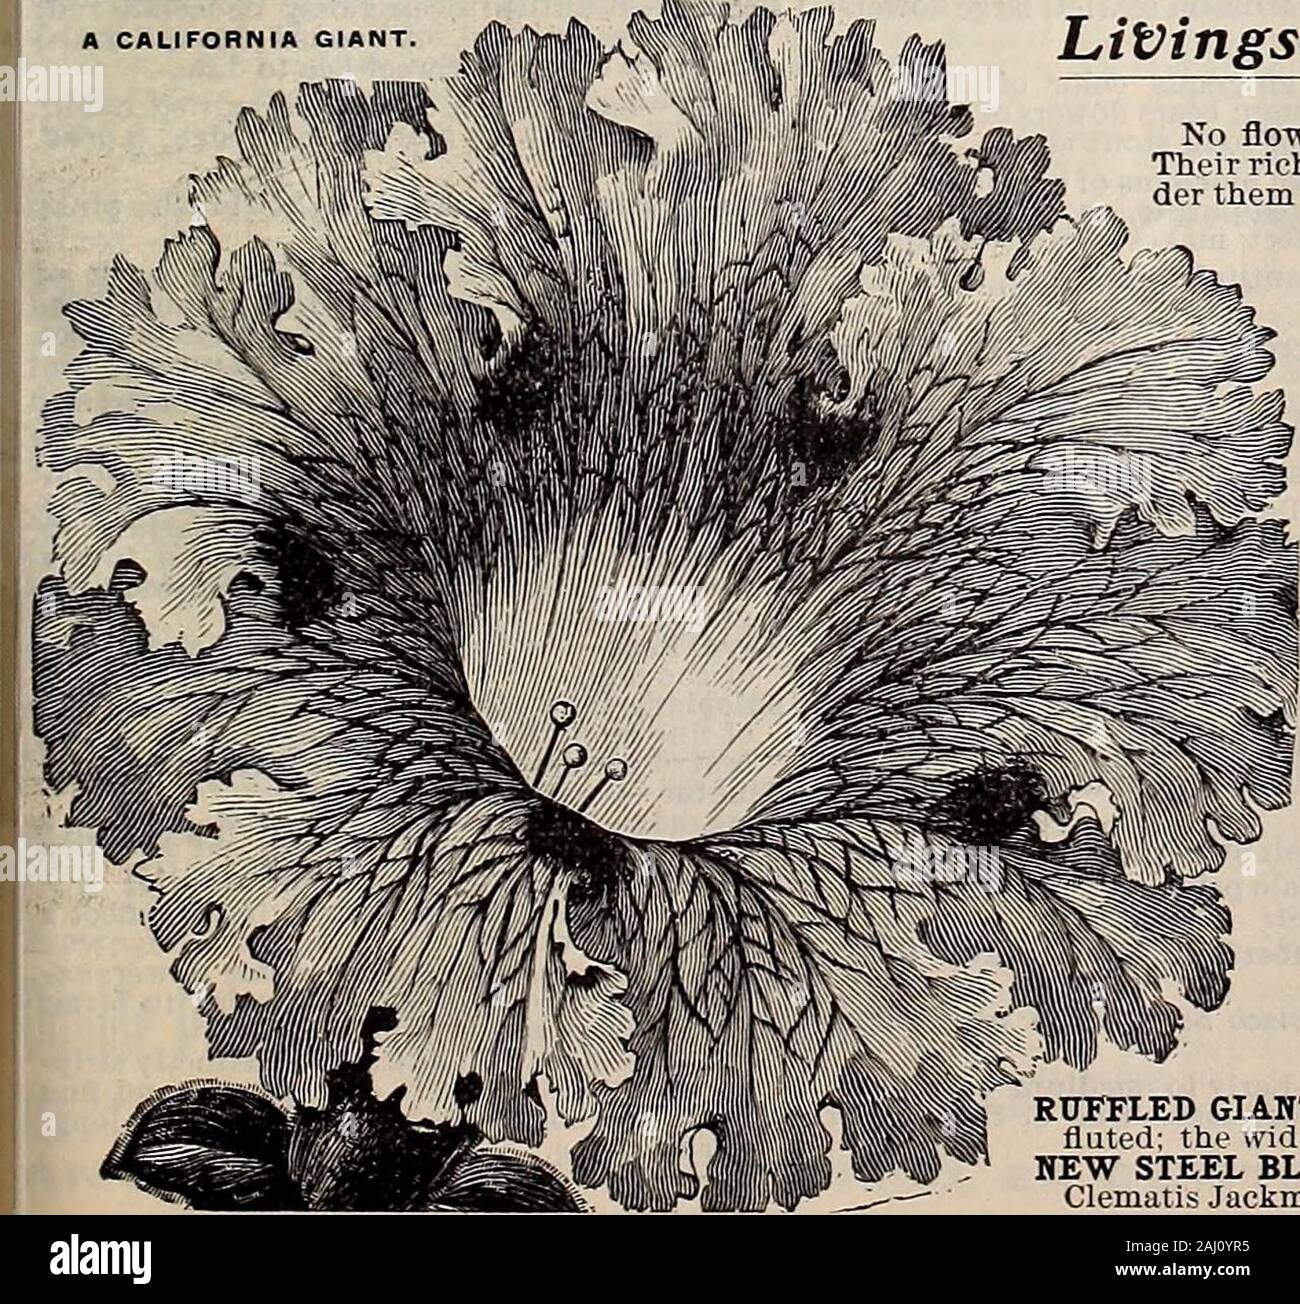 Livingston's seeds : 1902 'true blue' annual . Mixed 5 SHIRLEY, DOUBLE—A rich mixture ofdouble and semi-double flowers. Finest Mixed 5 ORIENTAL--Of the darkest red; beau-tilul; one of the showiest of hardyPerennial Poppies; specimen flowershave been grown to meauure 9 inches. 5ORIENTAL HYBRIDS, Mixed-Flowersof immense size. Many novel colors—soft pmk. cherry, dazzling scarlet,rich maroon, purple, etc.; culturesimple; perfectly hardy perennials. Finest mixed lO- THE BRIDE—Single fringed extralarge spotless white flowers; makes a showy bed 5 WHITE SWAN—immense double tnngetl nowers ol purest wli Stock Photo